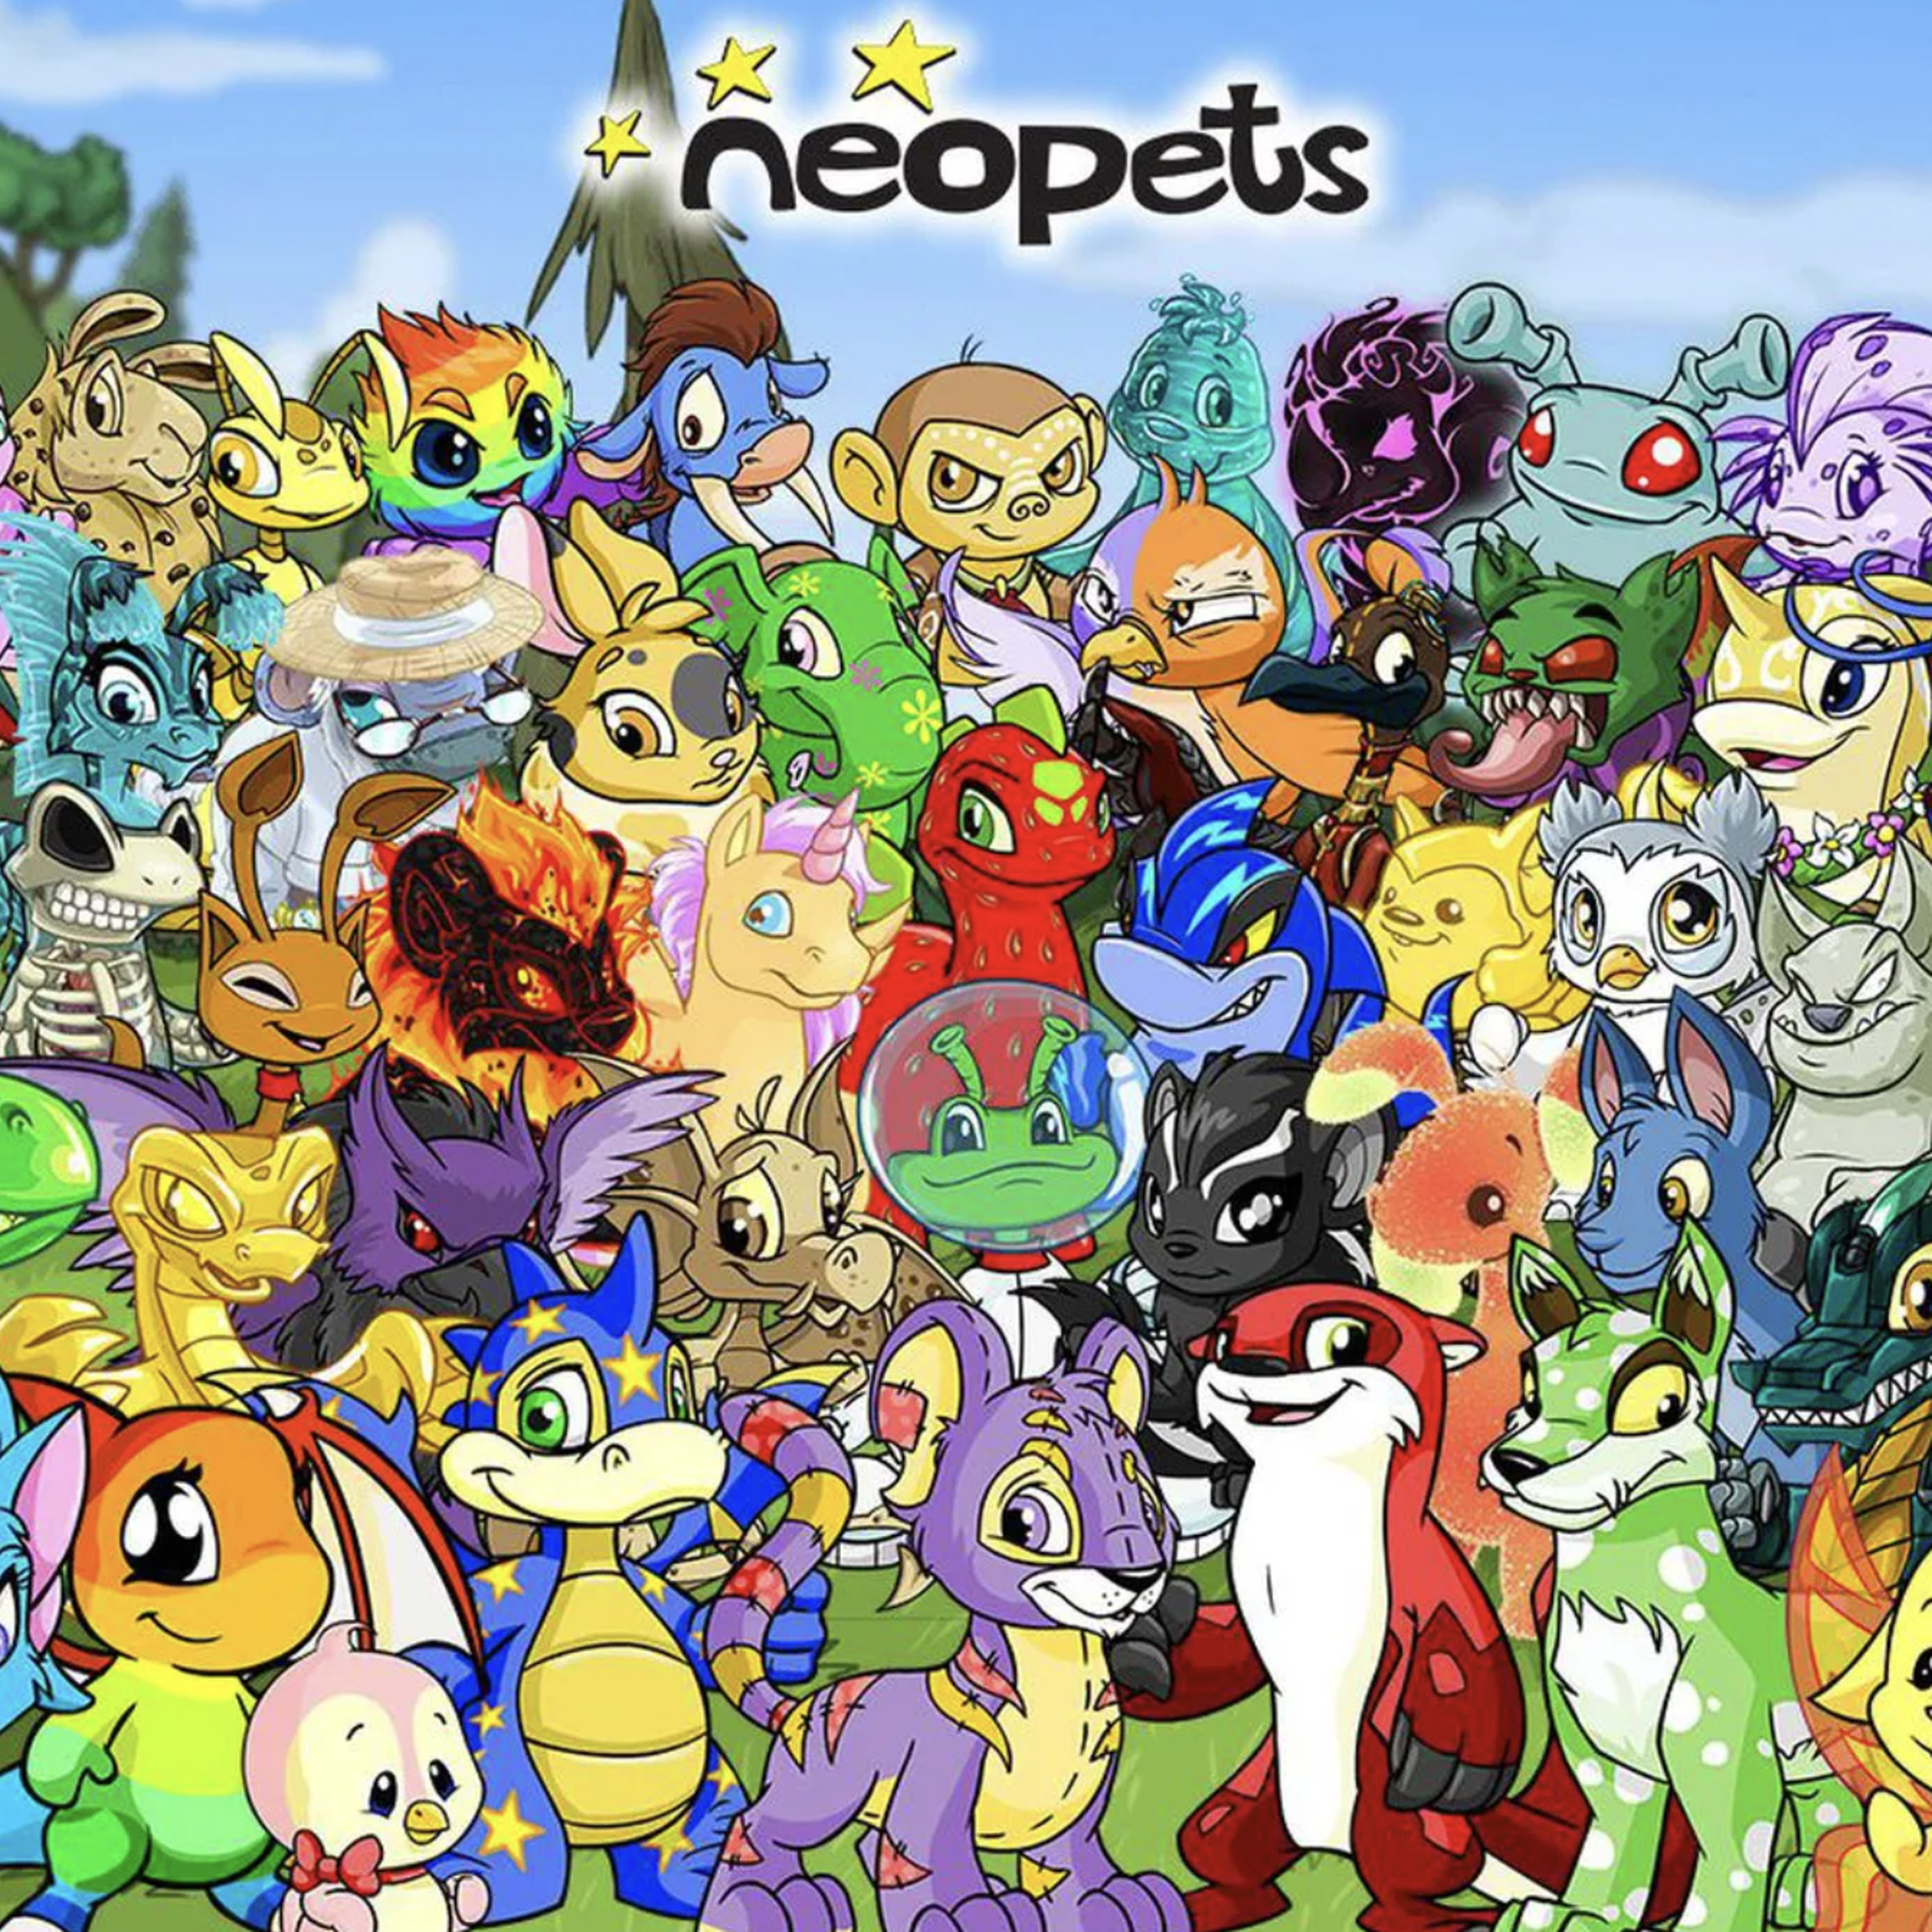 Image from Neopets.com featuring a collage of different neopet creatures